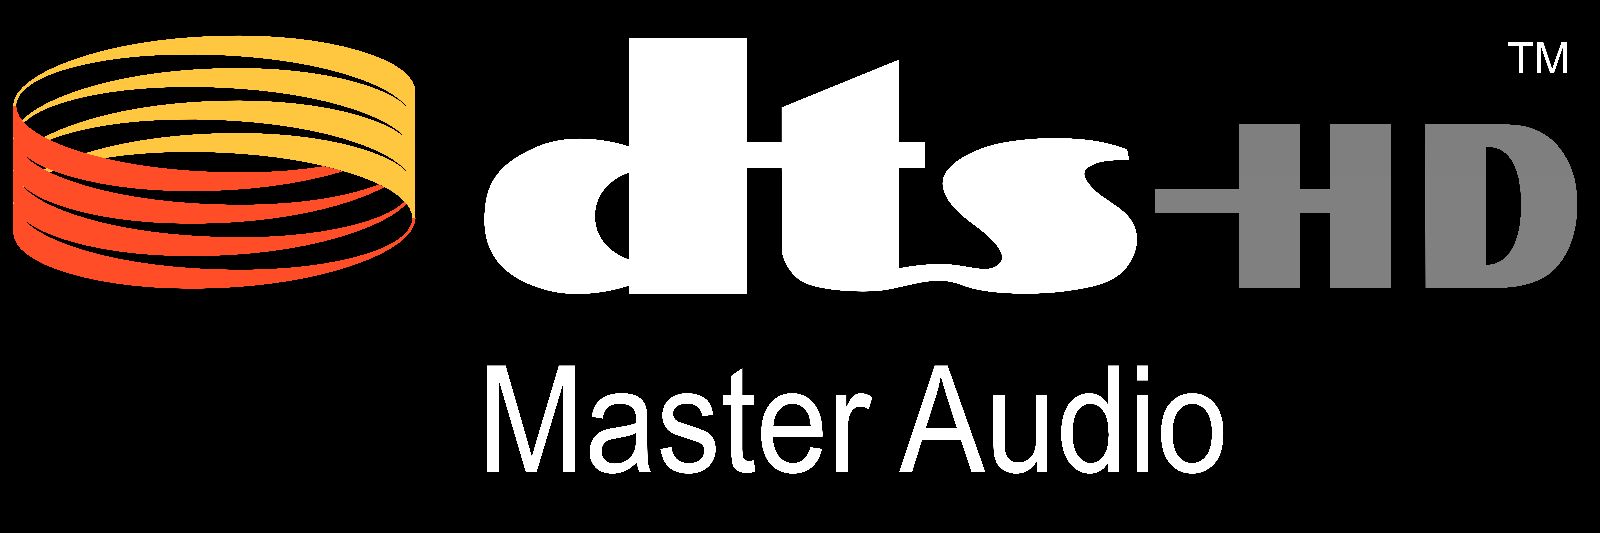 dts hd master audio download